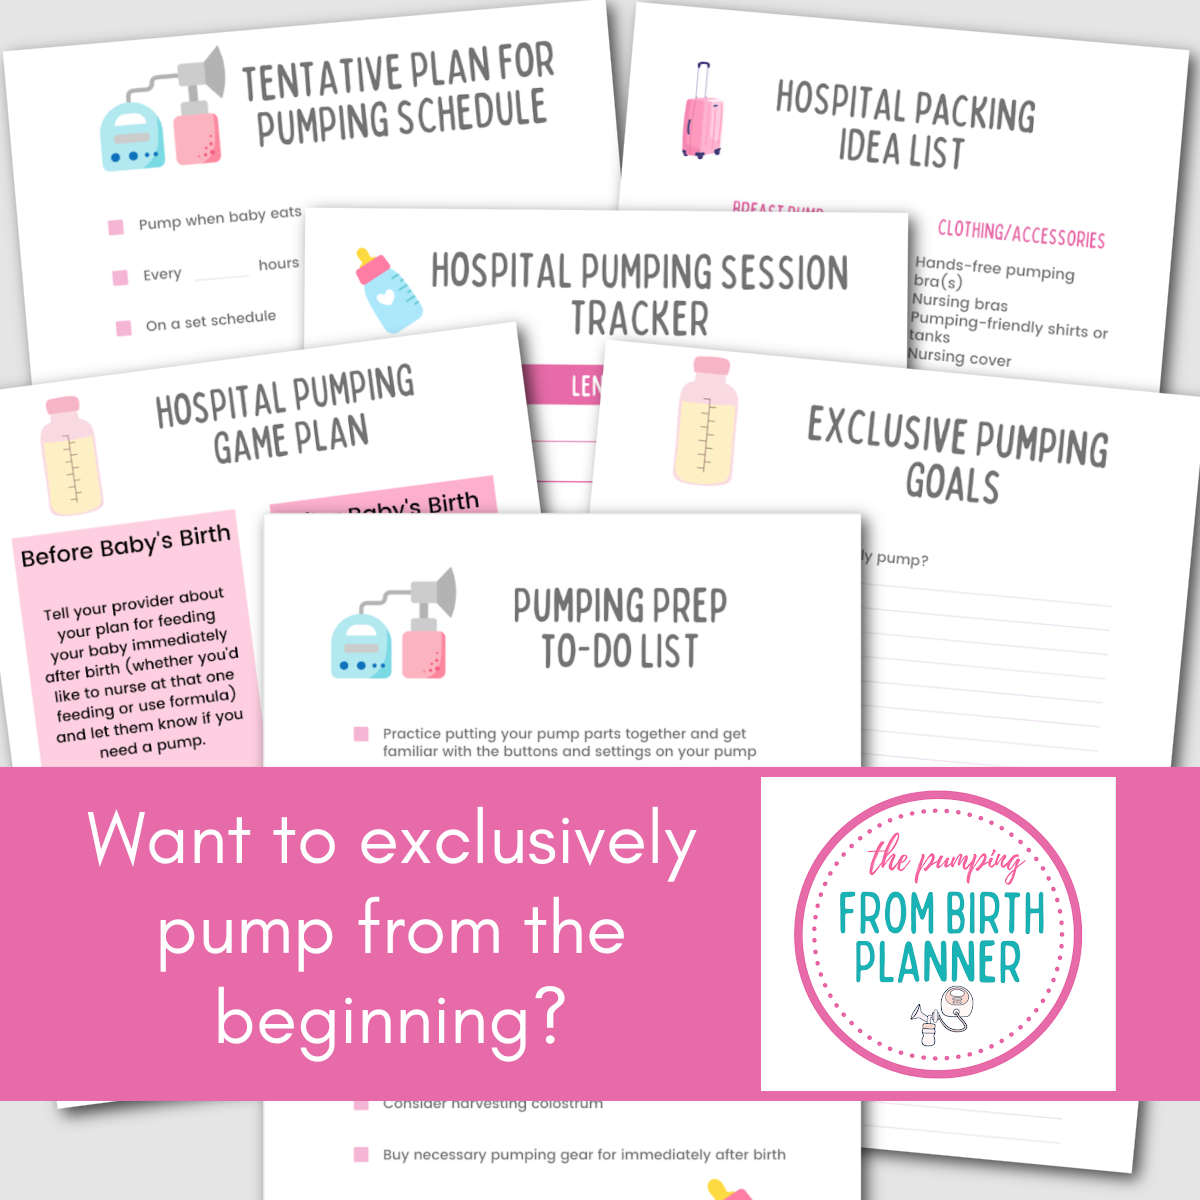 Pumping from Birth Planner